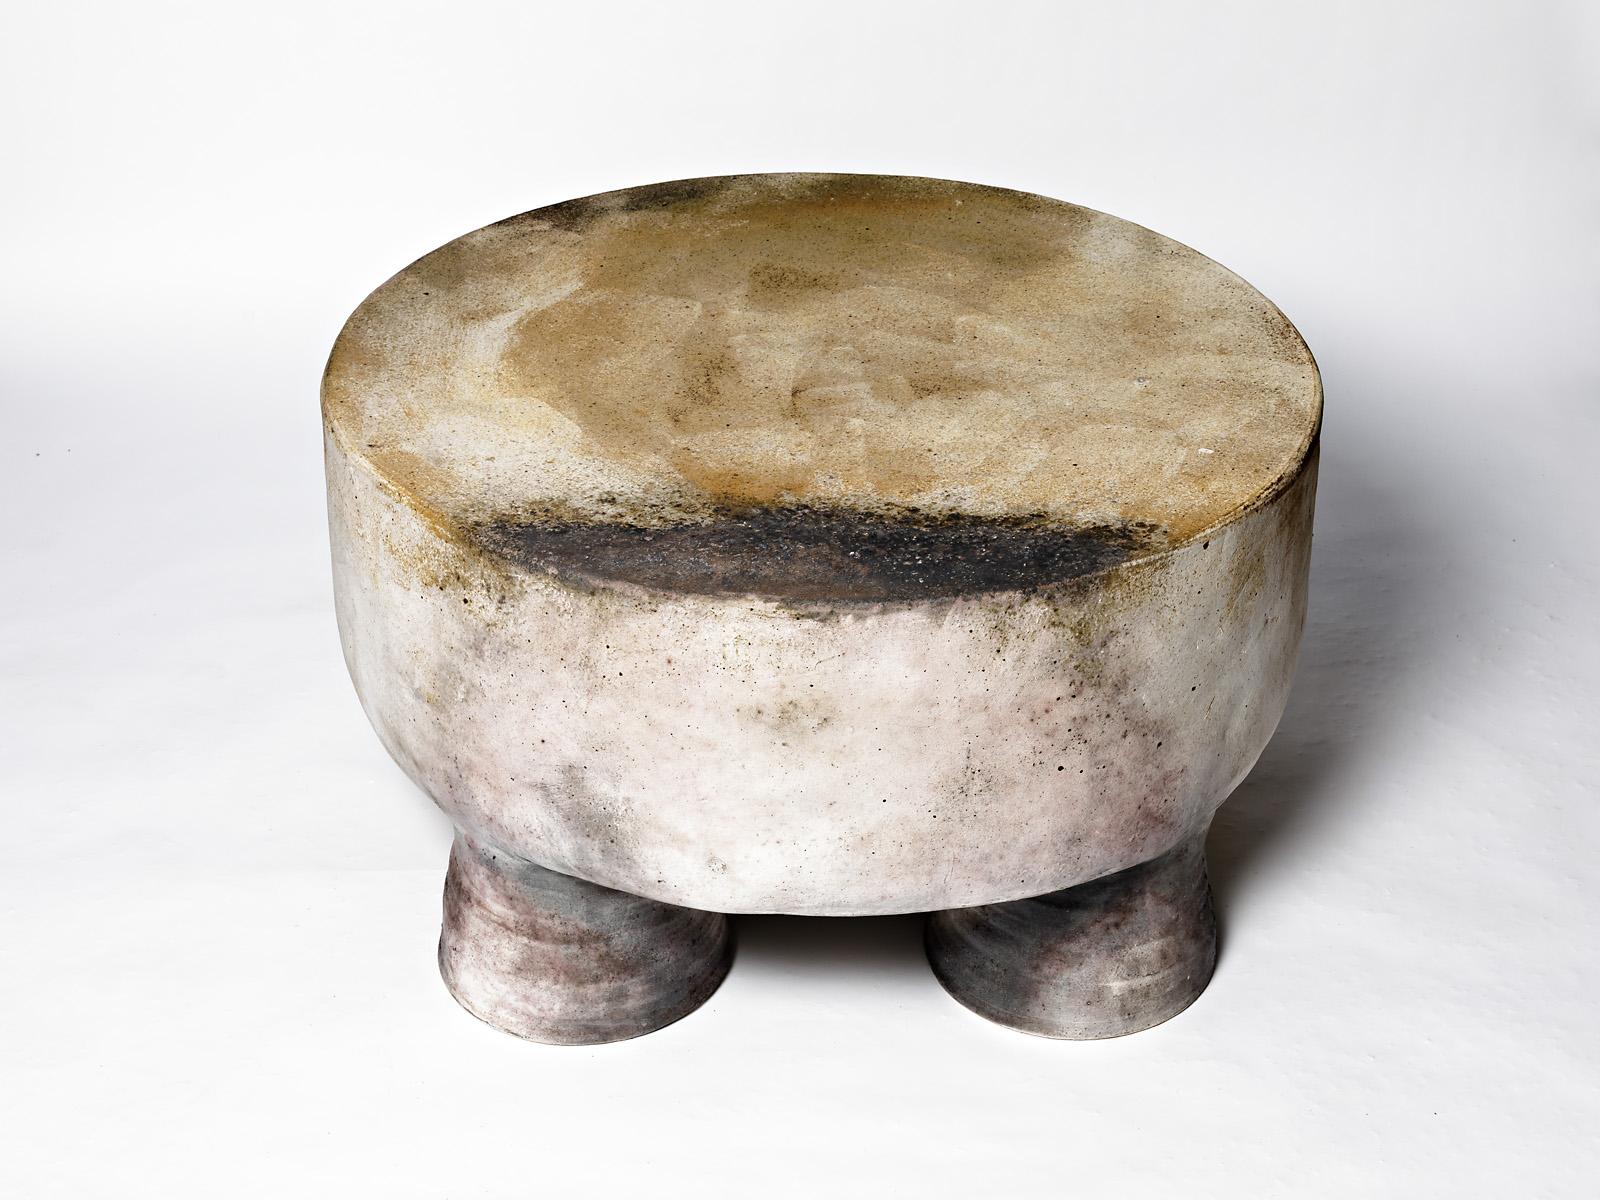 Beaux Arts Unique and Exceptionnel Coffee Table by Mia Jensen, Wood Firing, 2022